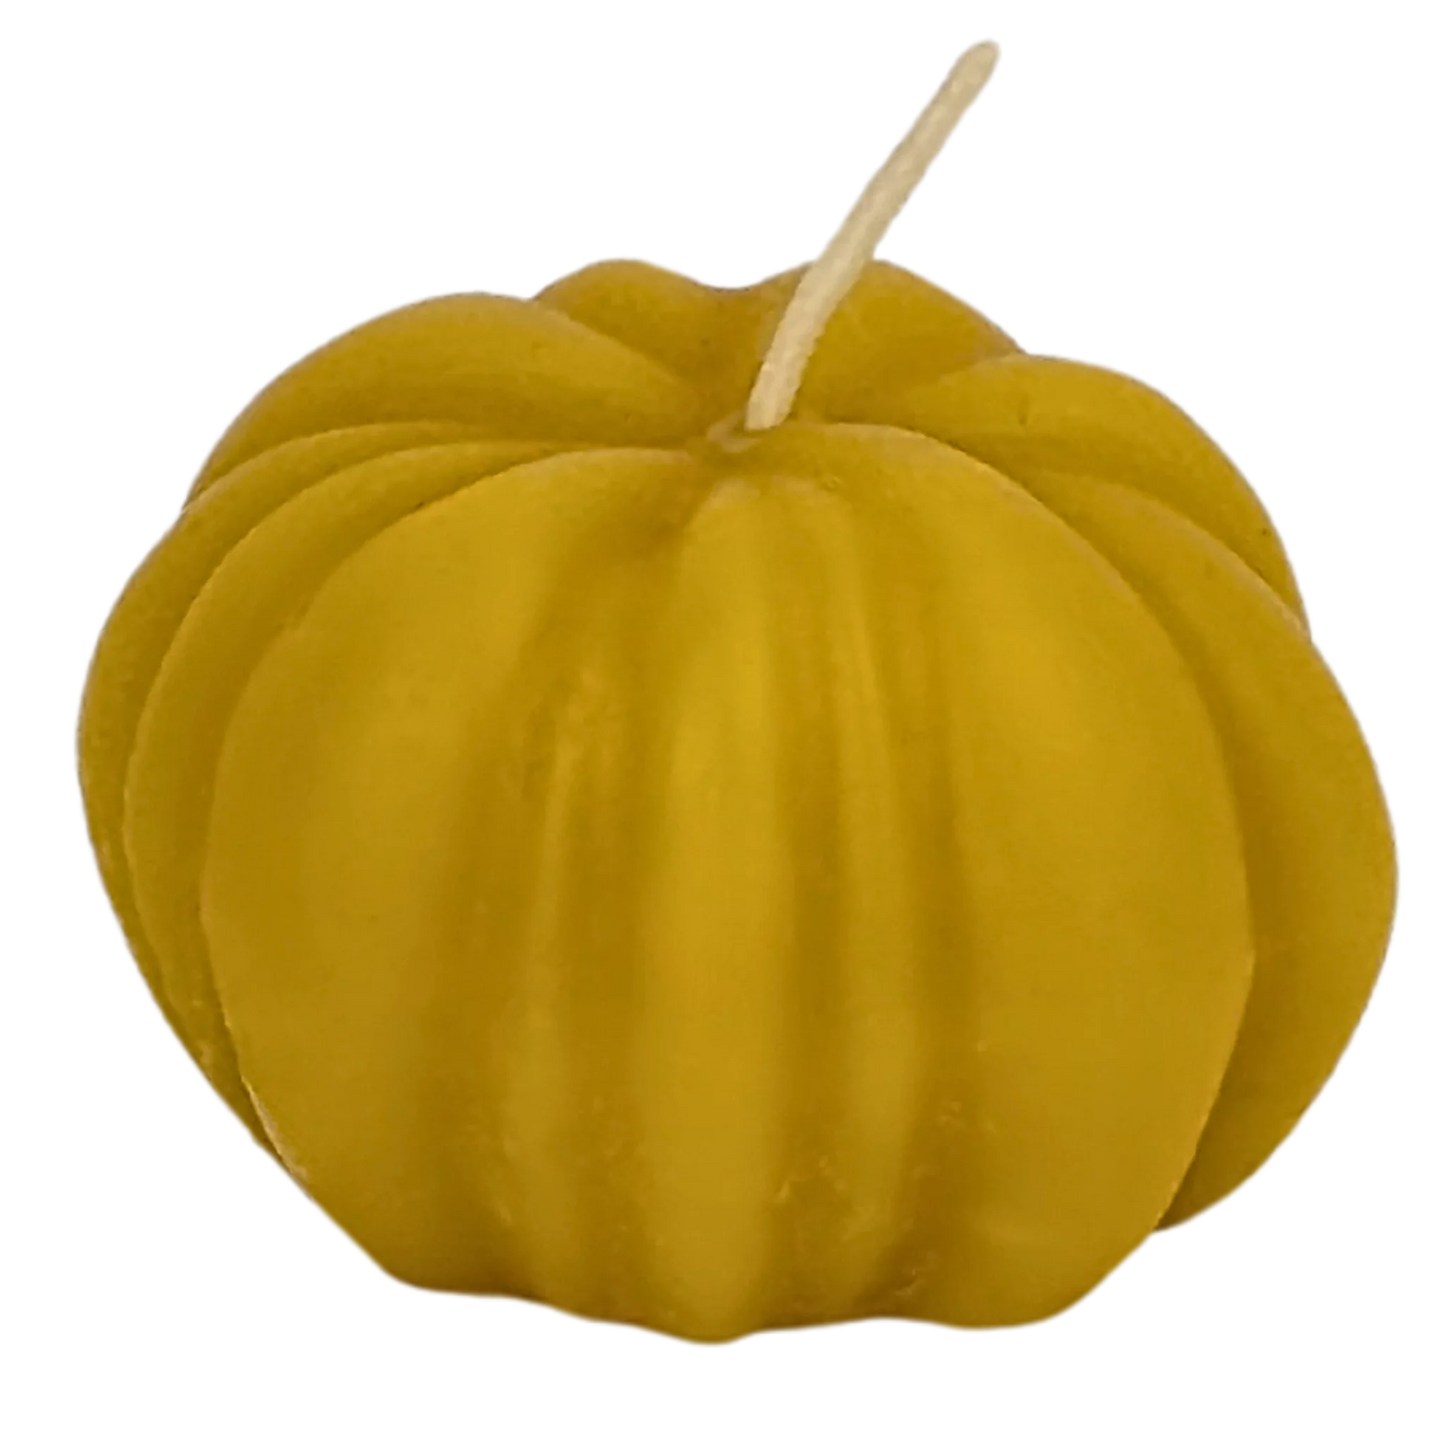 Handcrafted pure beeswax candle shaped like a pumpkin, perfect for adding a cozy autumn ambiance to any home, made in the UK.